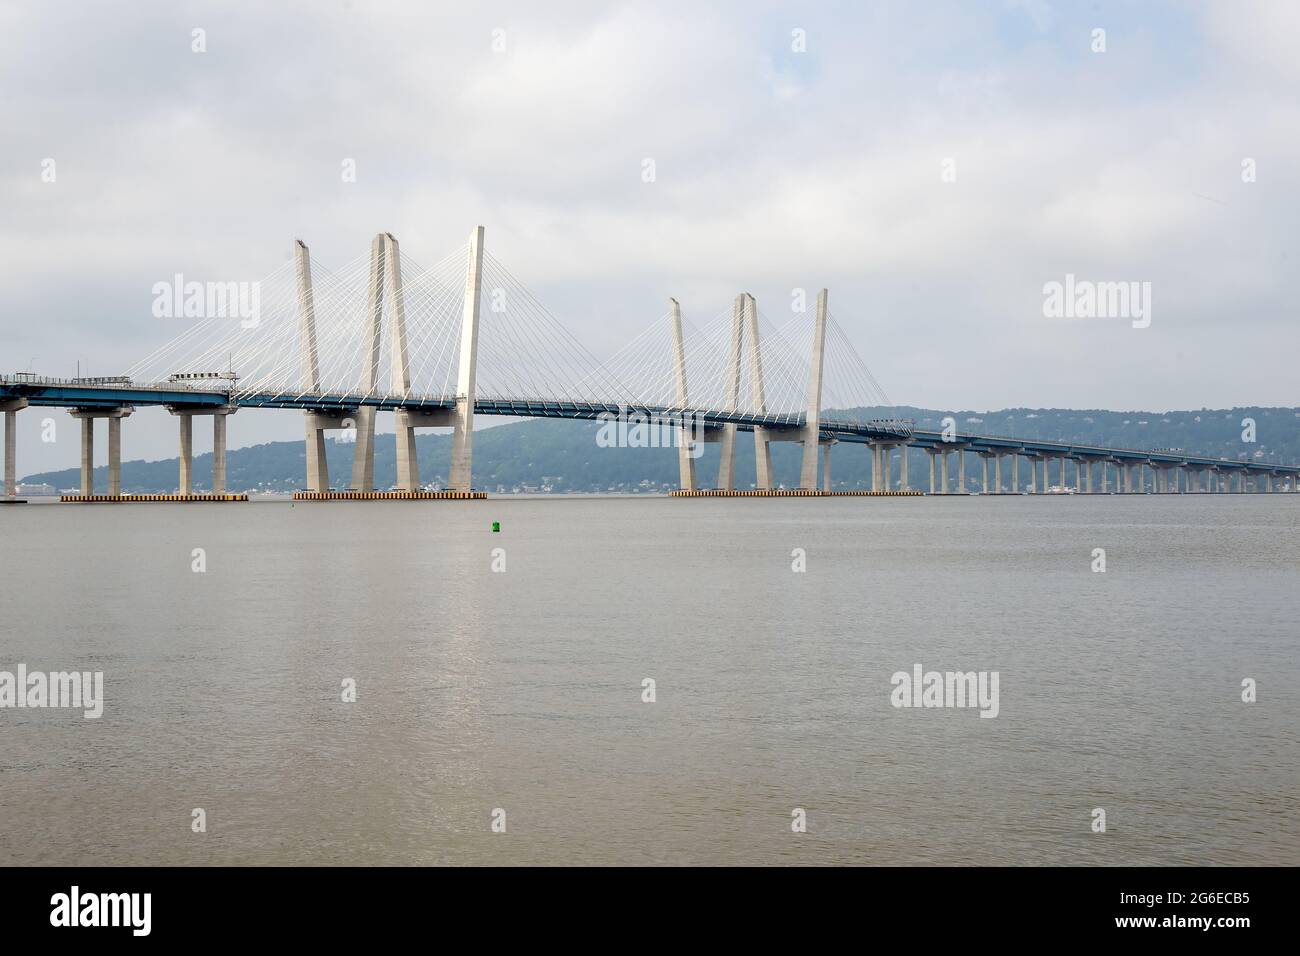 Tarrytown, NY - USA - July 5, 2021: Wide view of the iconic Governor Mario M. Cuomo Bridge, is a twin cable-stayed bridge spanning the Hudson River be Stock Photo